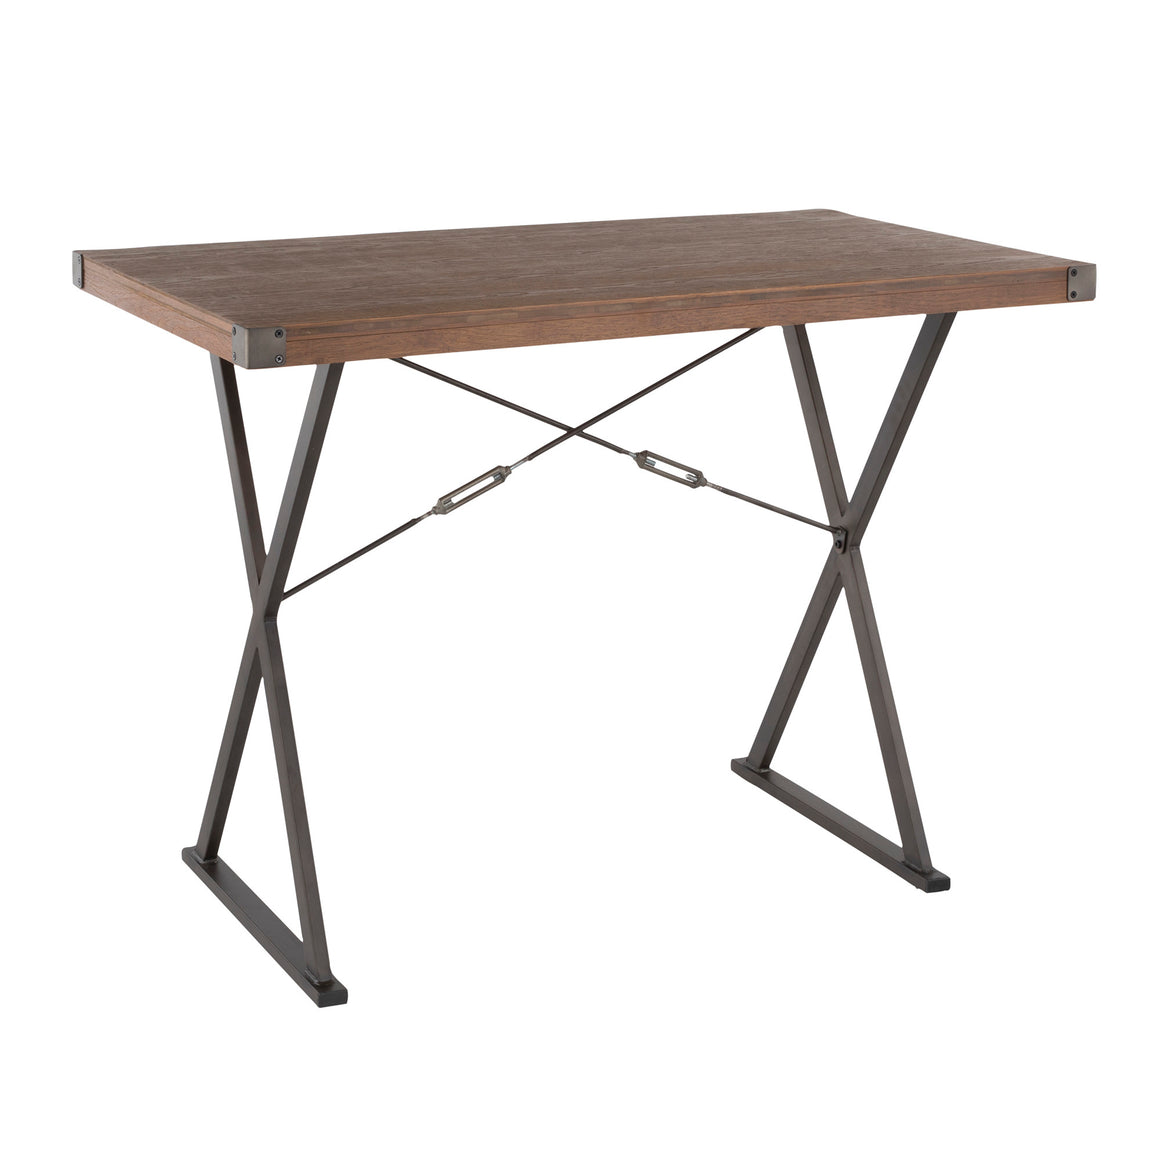 Prep Industrial Counter Table in Antique Metal and Brown Wood-Pressed Grain Bamboo by LumiSource